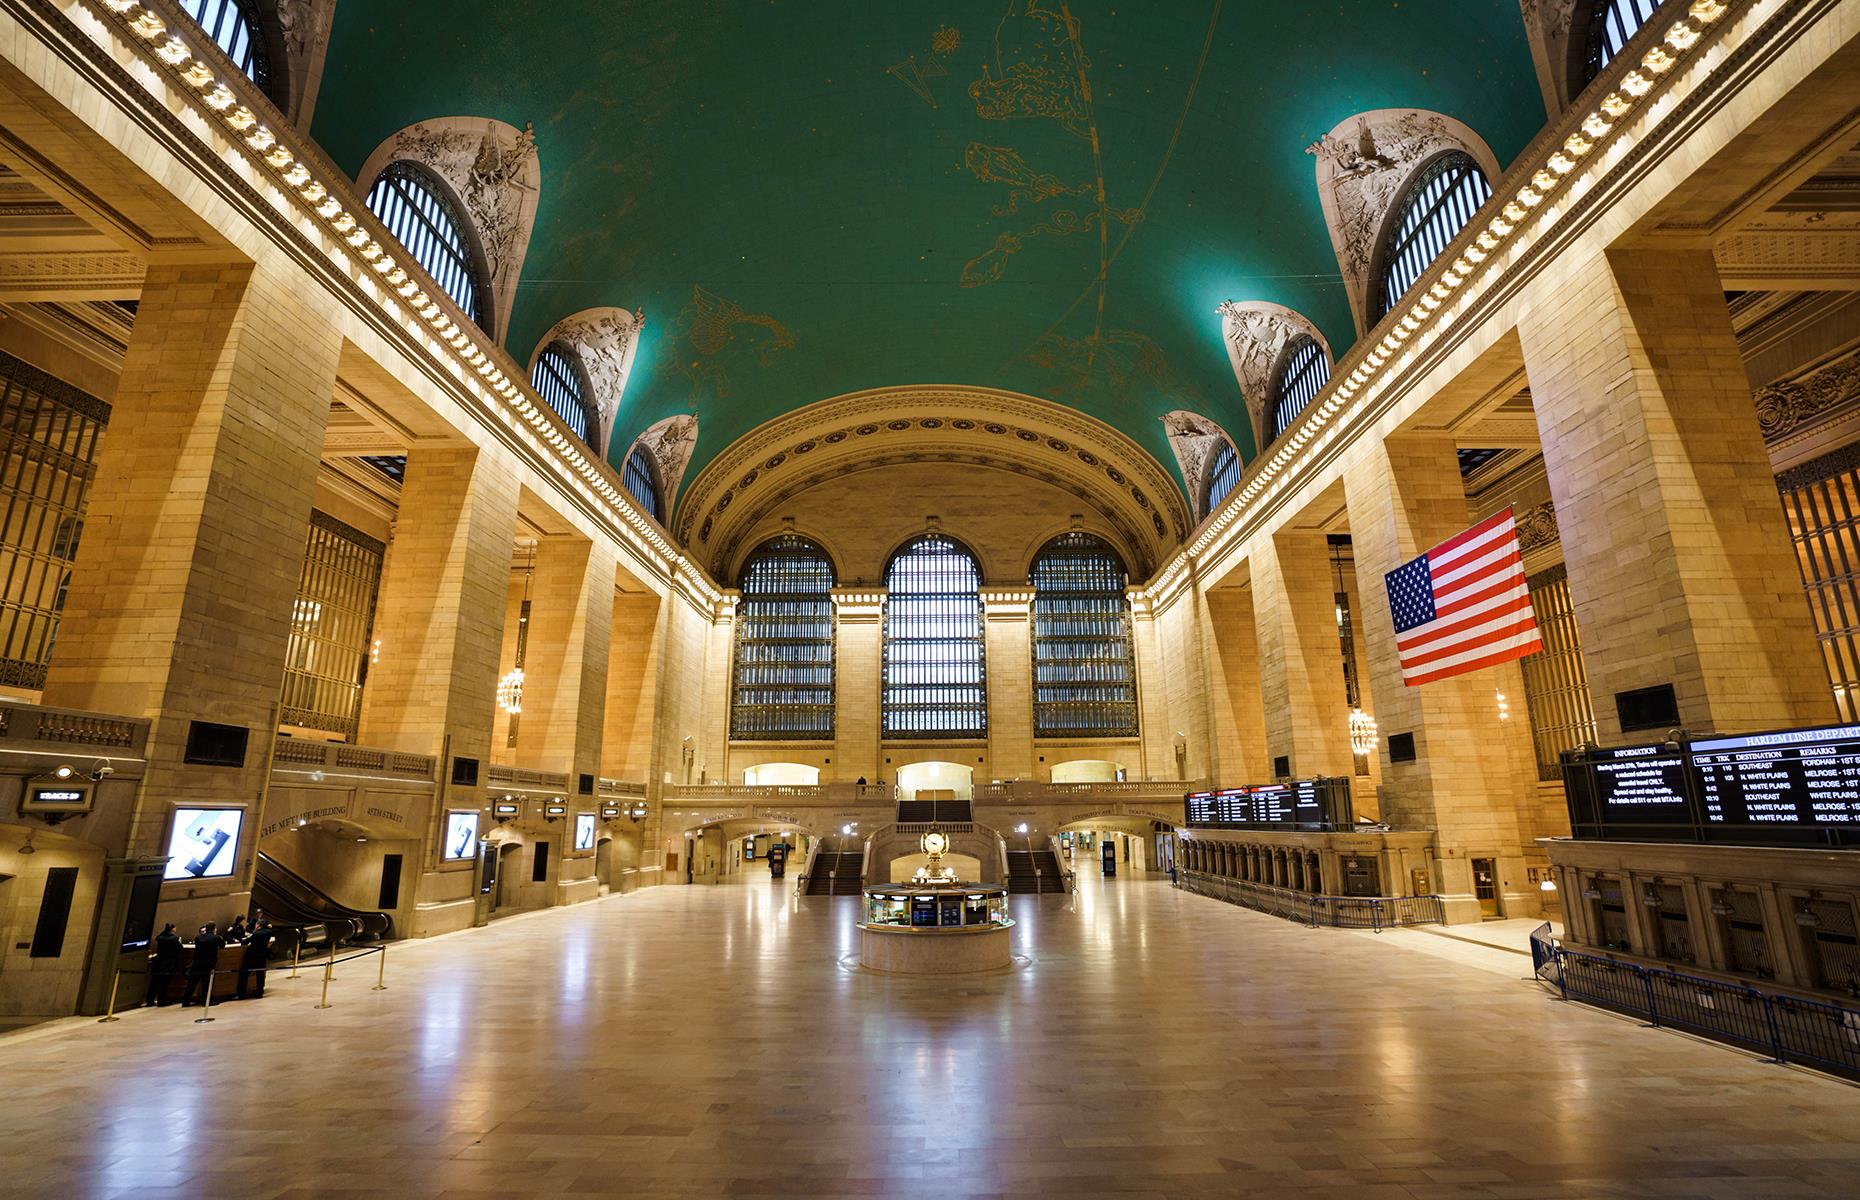 <p>Probably the most famous train station in the world, Grand Central Terminal really is grand. Opened in 1913, it features a ceiling fresco in the Main Concourse depicting the constellations of the zodiac and the building itself has been designated a National Historic Landmark due to its magnificent Beaux-Arts facade.</p>  <p><a href="https://www.loveexploring.com/gallerylist/158166/big-apple-secrets-the-unbelievable-history-of-new-york-city"><strong>Big Apple secrets: the unbelievable history of New York City</strong></a></p>